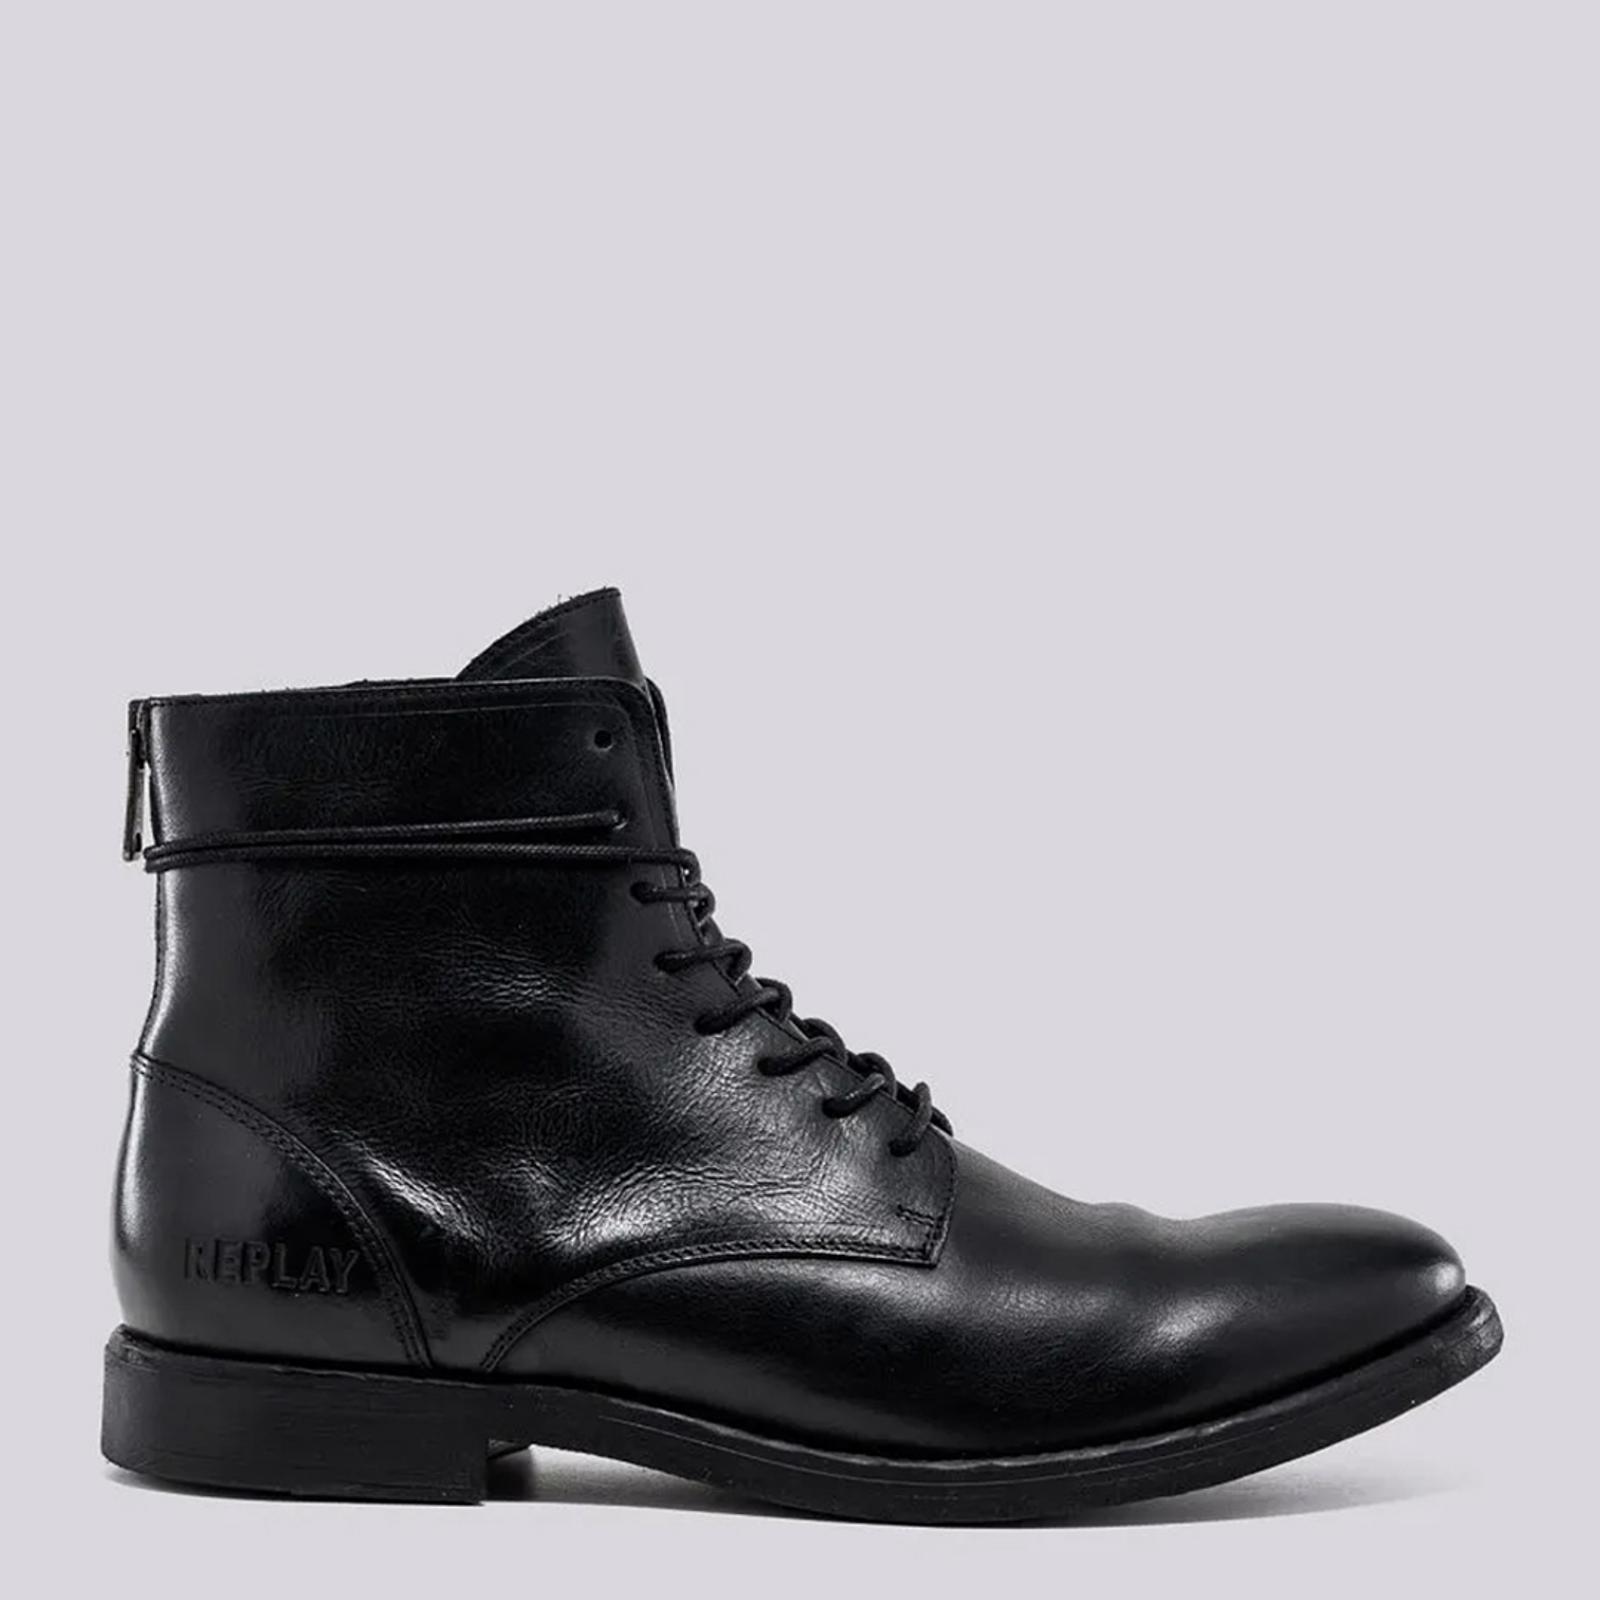 Black Lace Up Leather Boots - BrandAlley